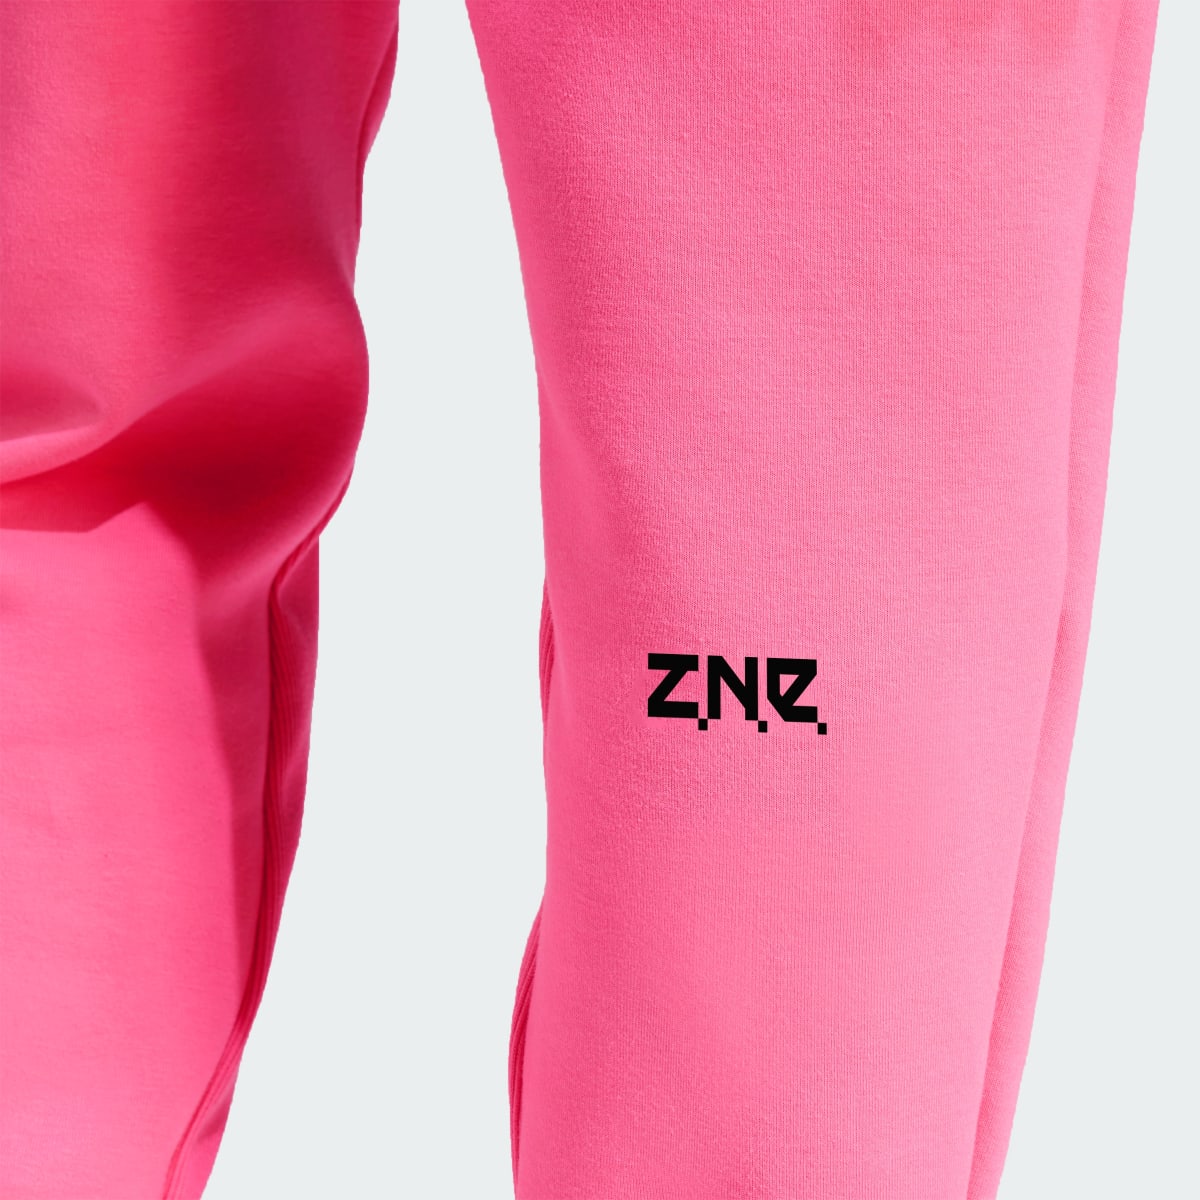 Adidas Z.N.E. Tracksuit Bottoms. 6